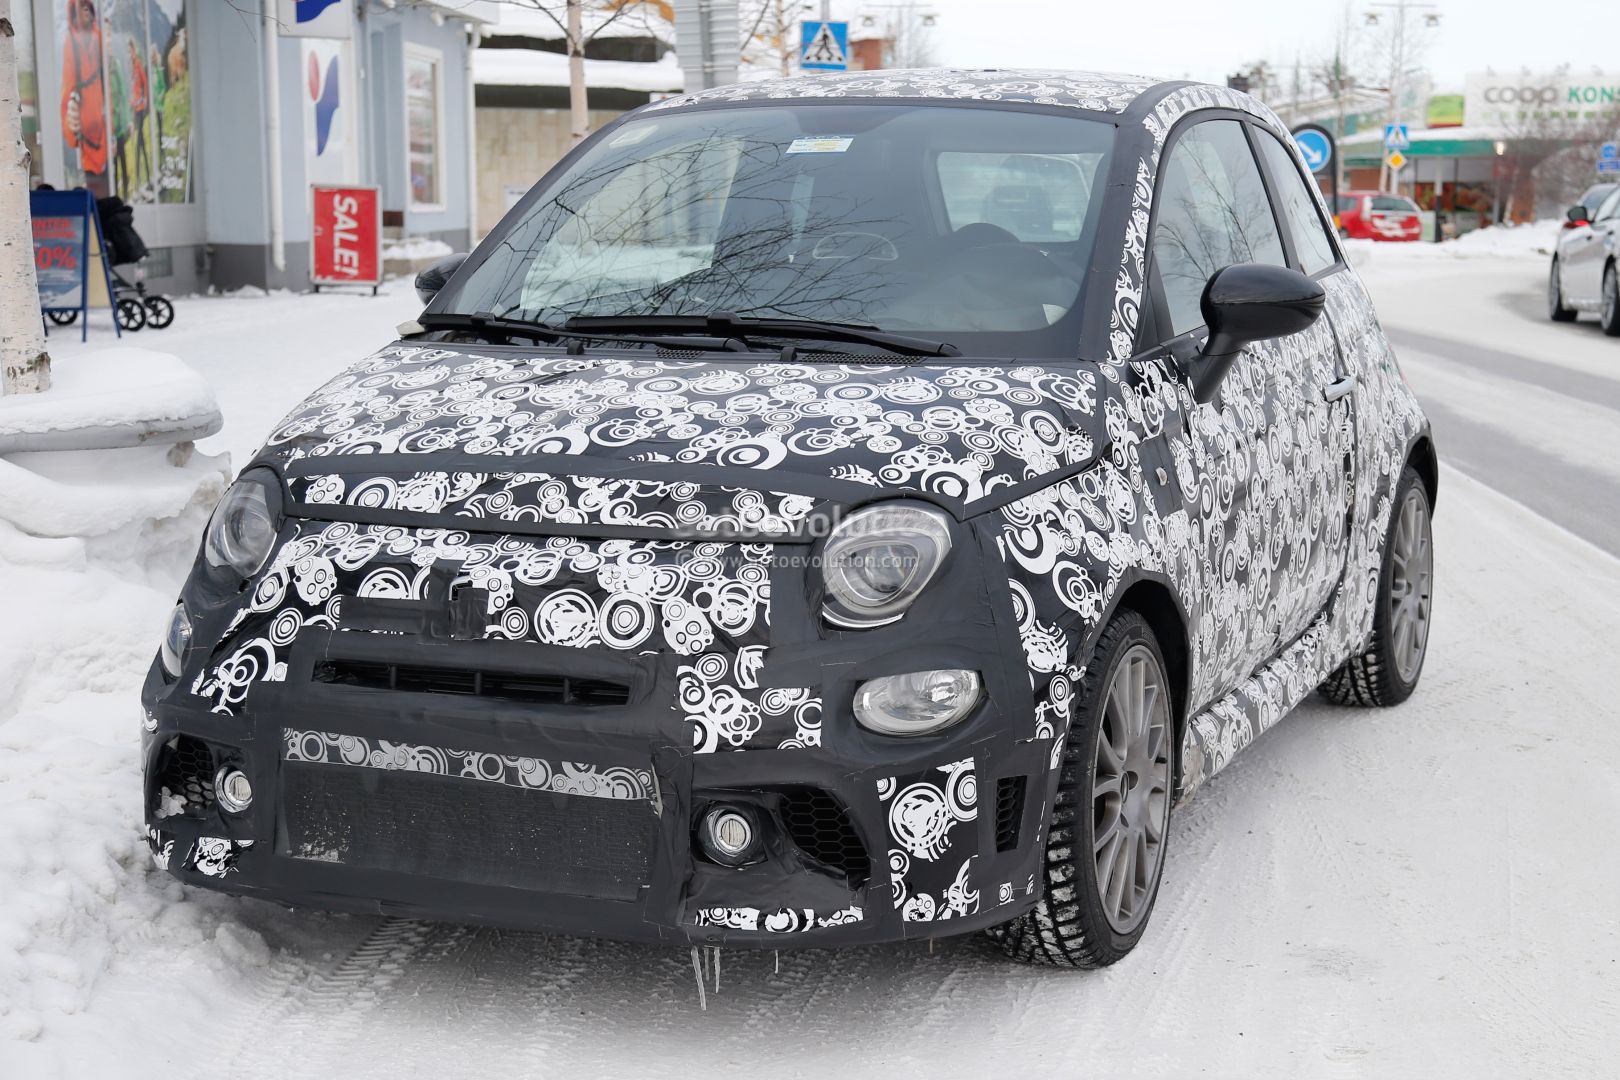 17 Fiat 500 Abarth 500 Abarth Cabrio Facelift Spied During Final Testing Autoevolution